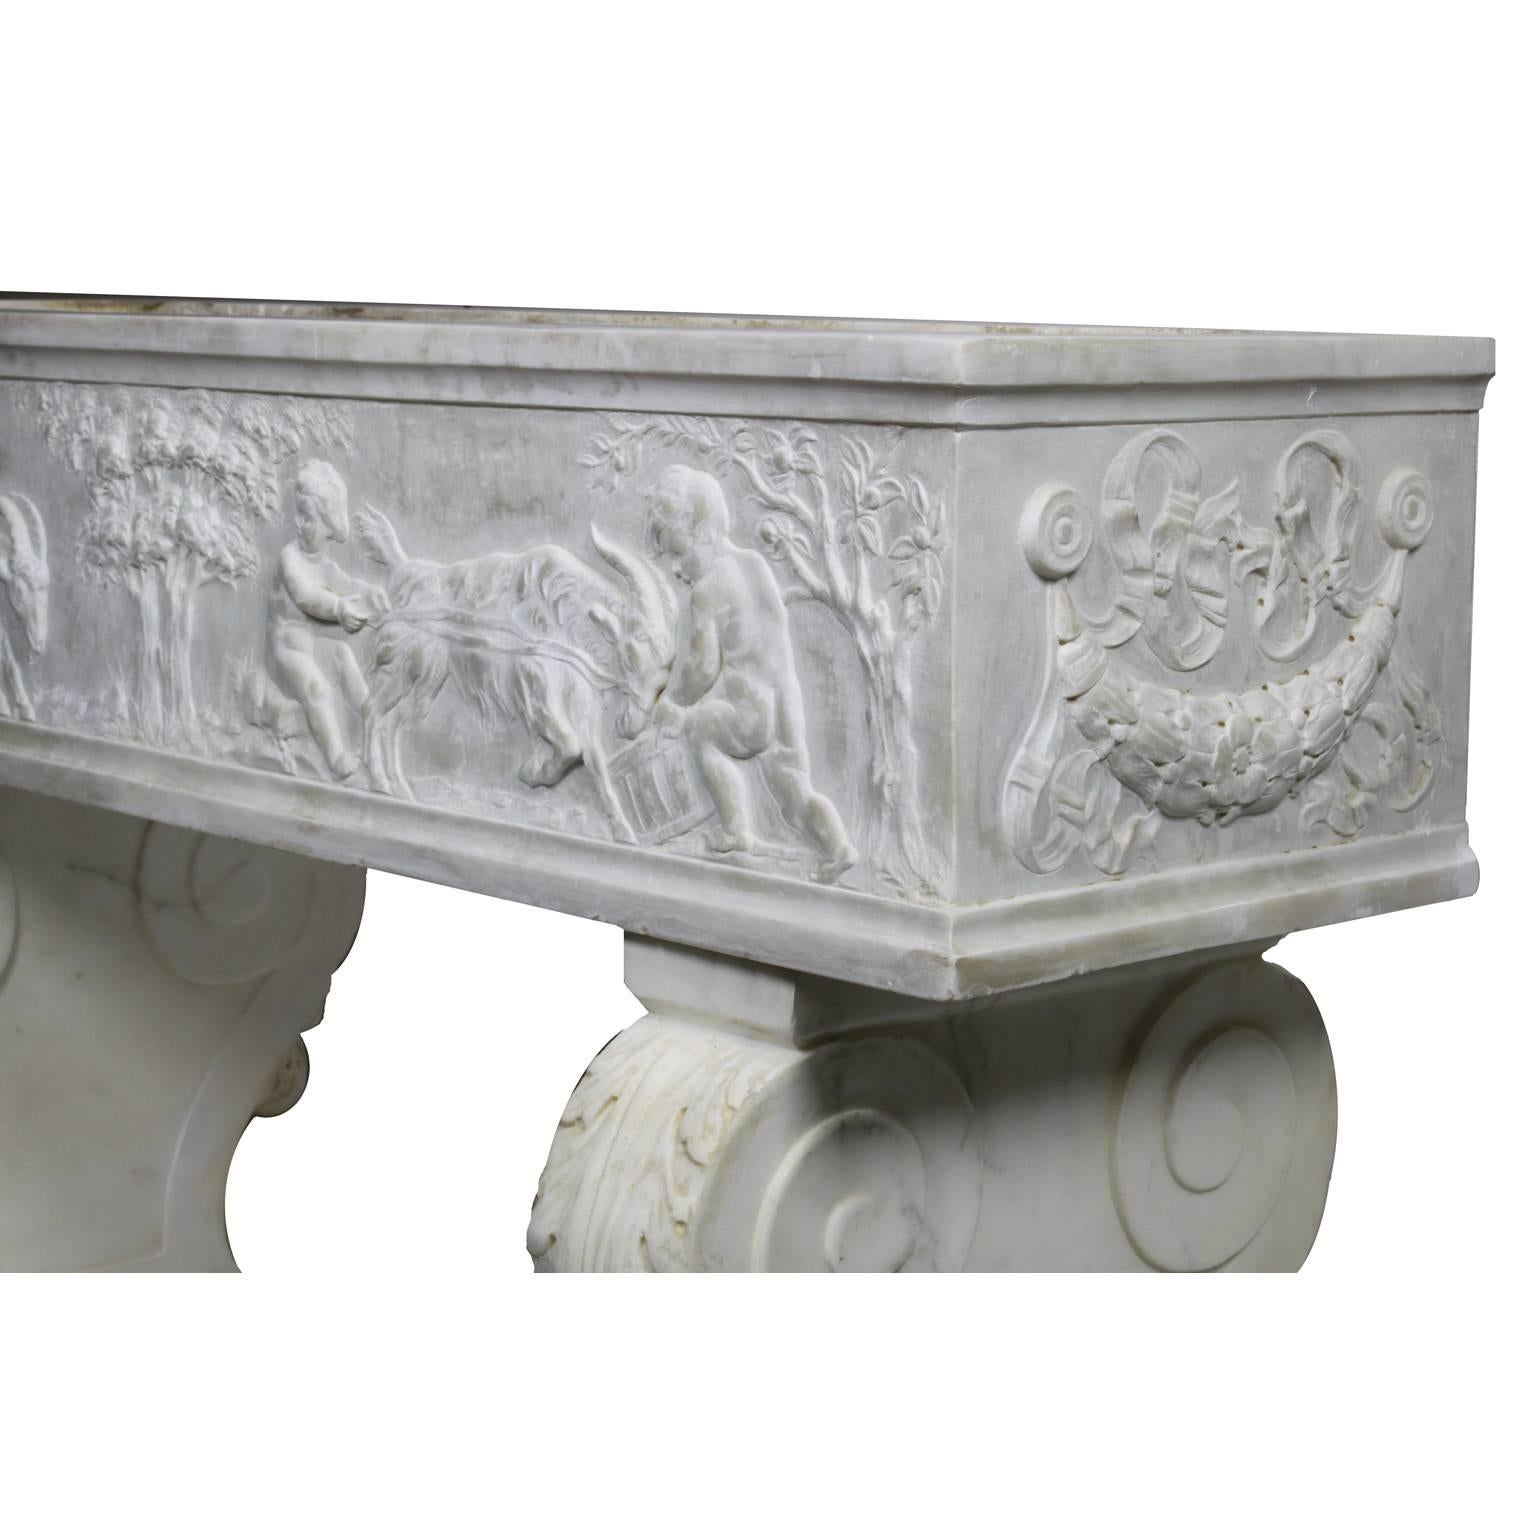 French 19th Century, Whimsical Rococo Style Marble Carved Planter with Children In Good Condition For Sale In Los Angeles, CA